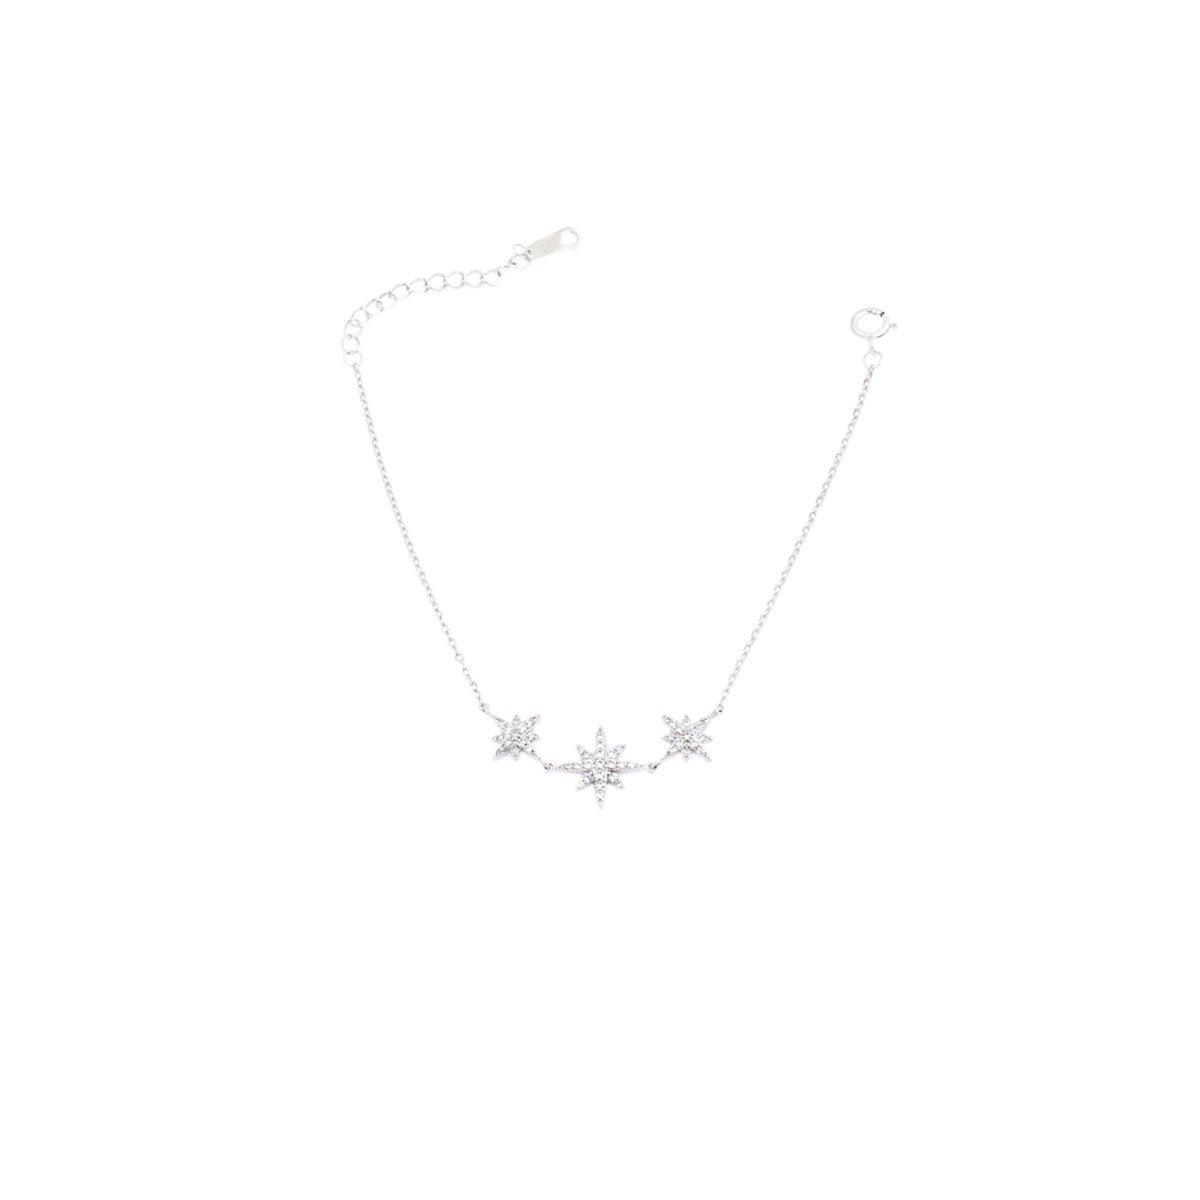 Necklace N1267 - 925 Sterling Silver - Asfour Crystal